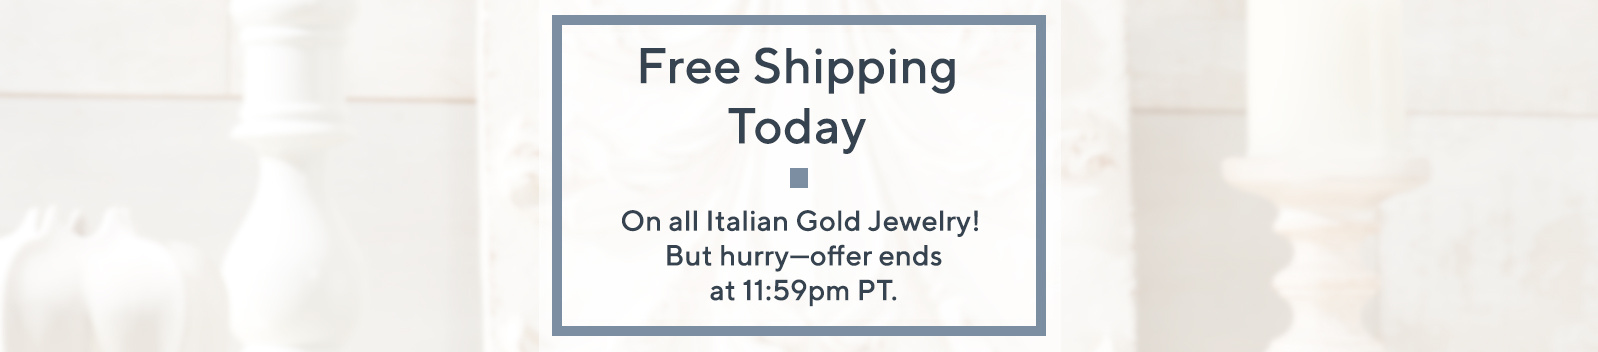 Free Shipping Today  On all Italian Gold Jewelry! But hurry—offer ends at 11:59pm PT.